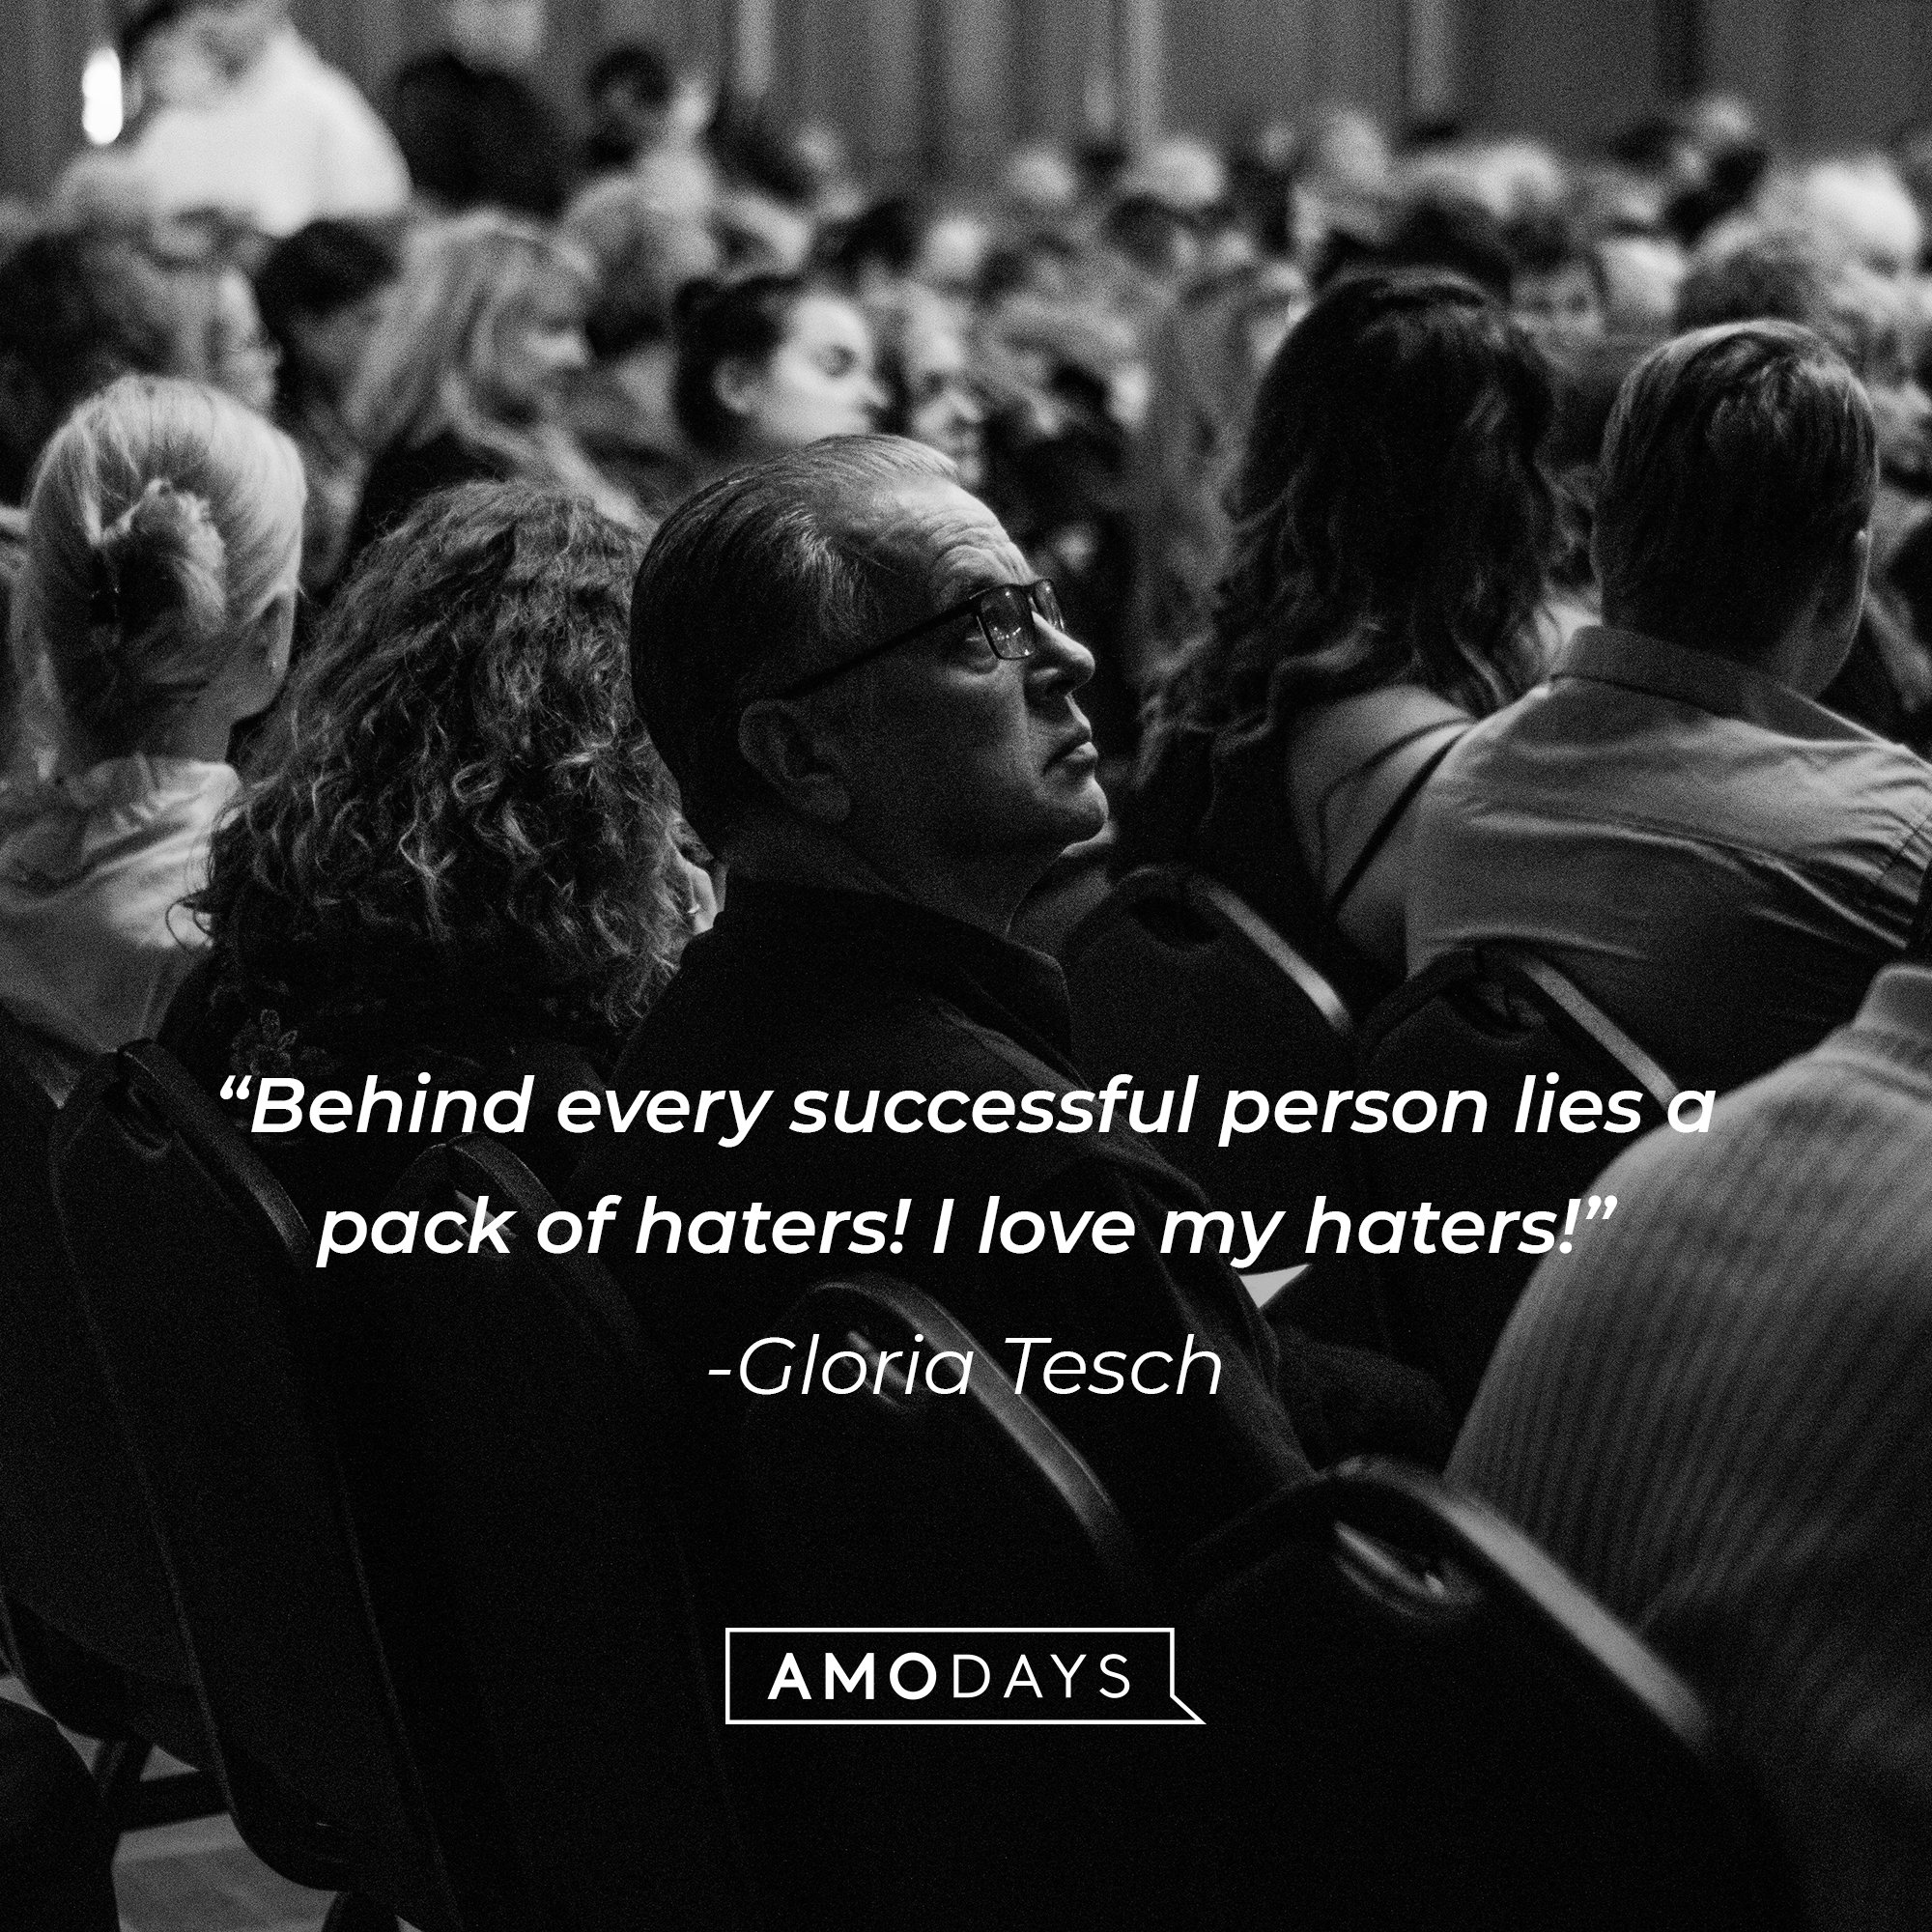 Gloria Tesch’s quote: “Behind every successful person lies a pack of haters! I love my haters!” | Image: AmoDays